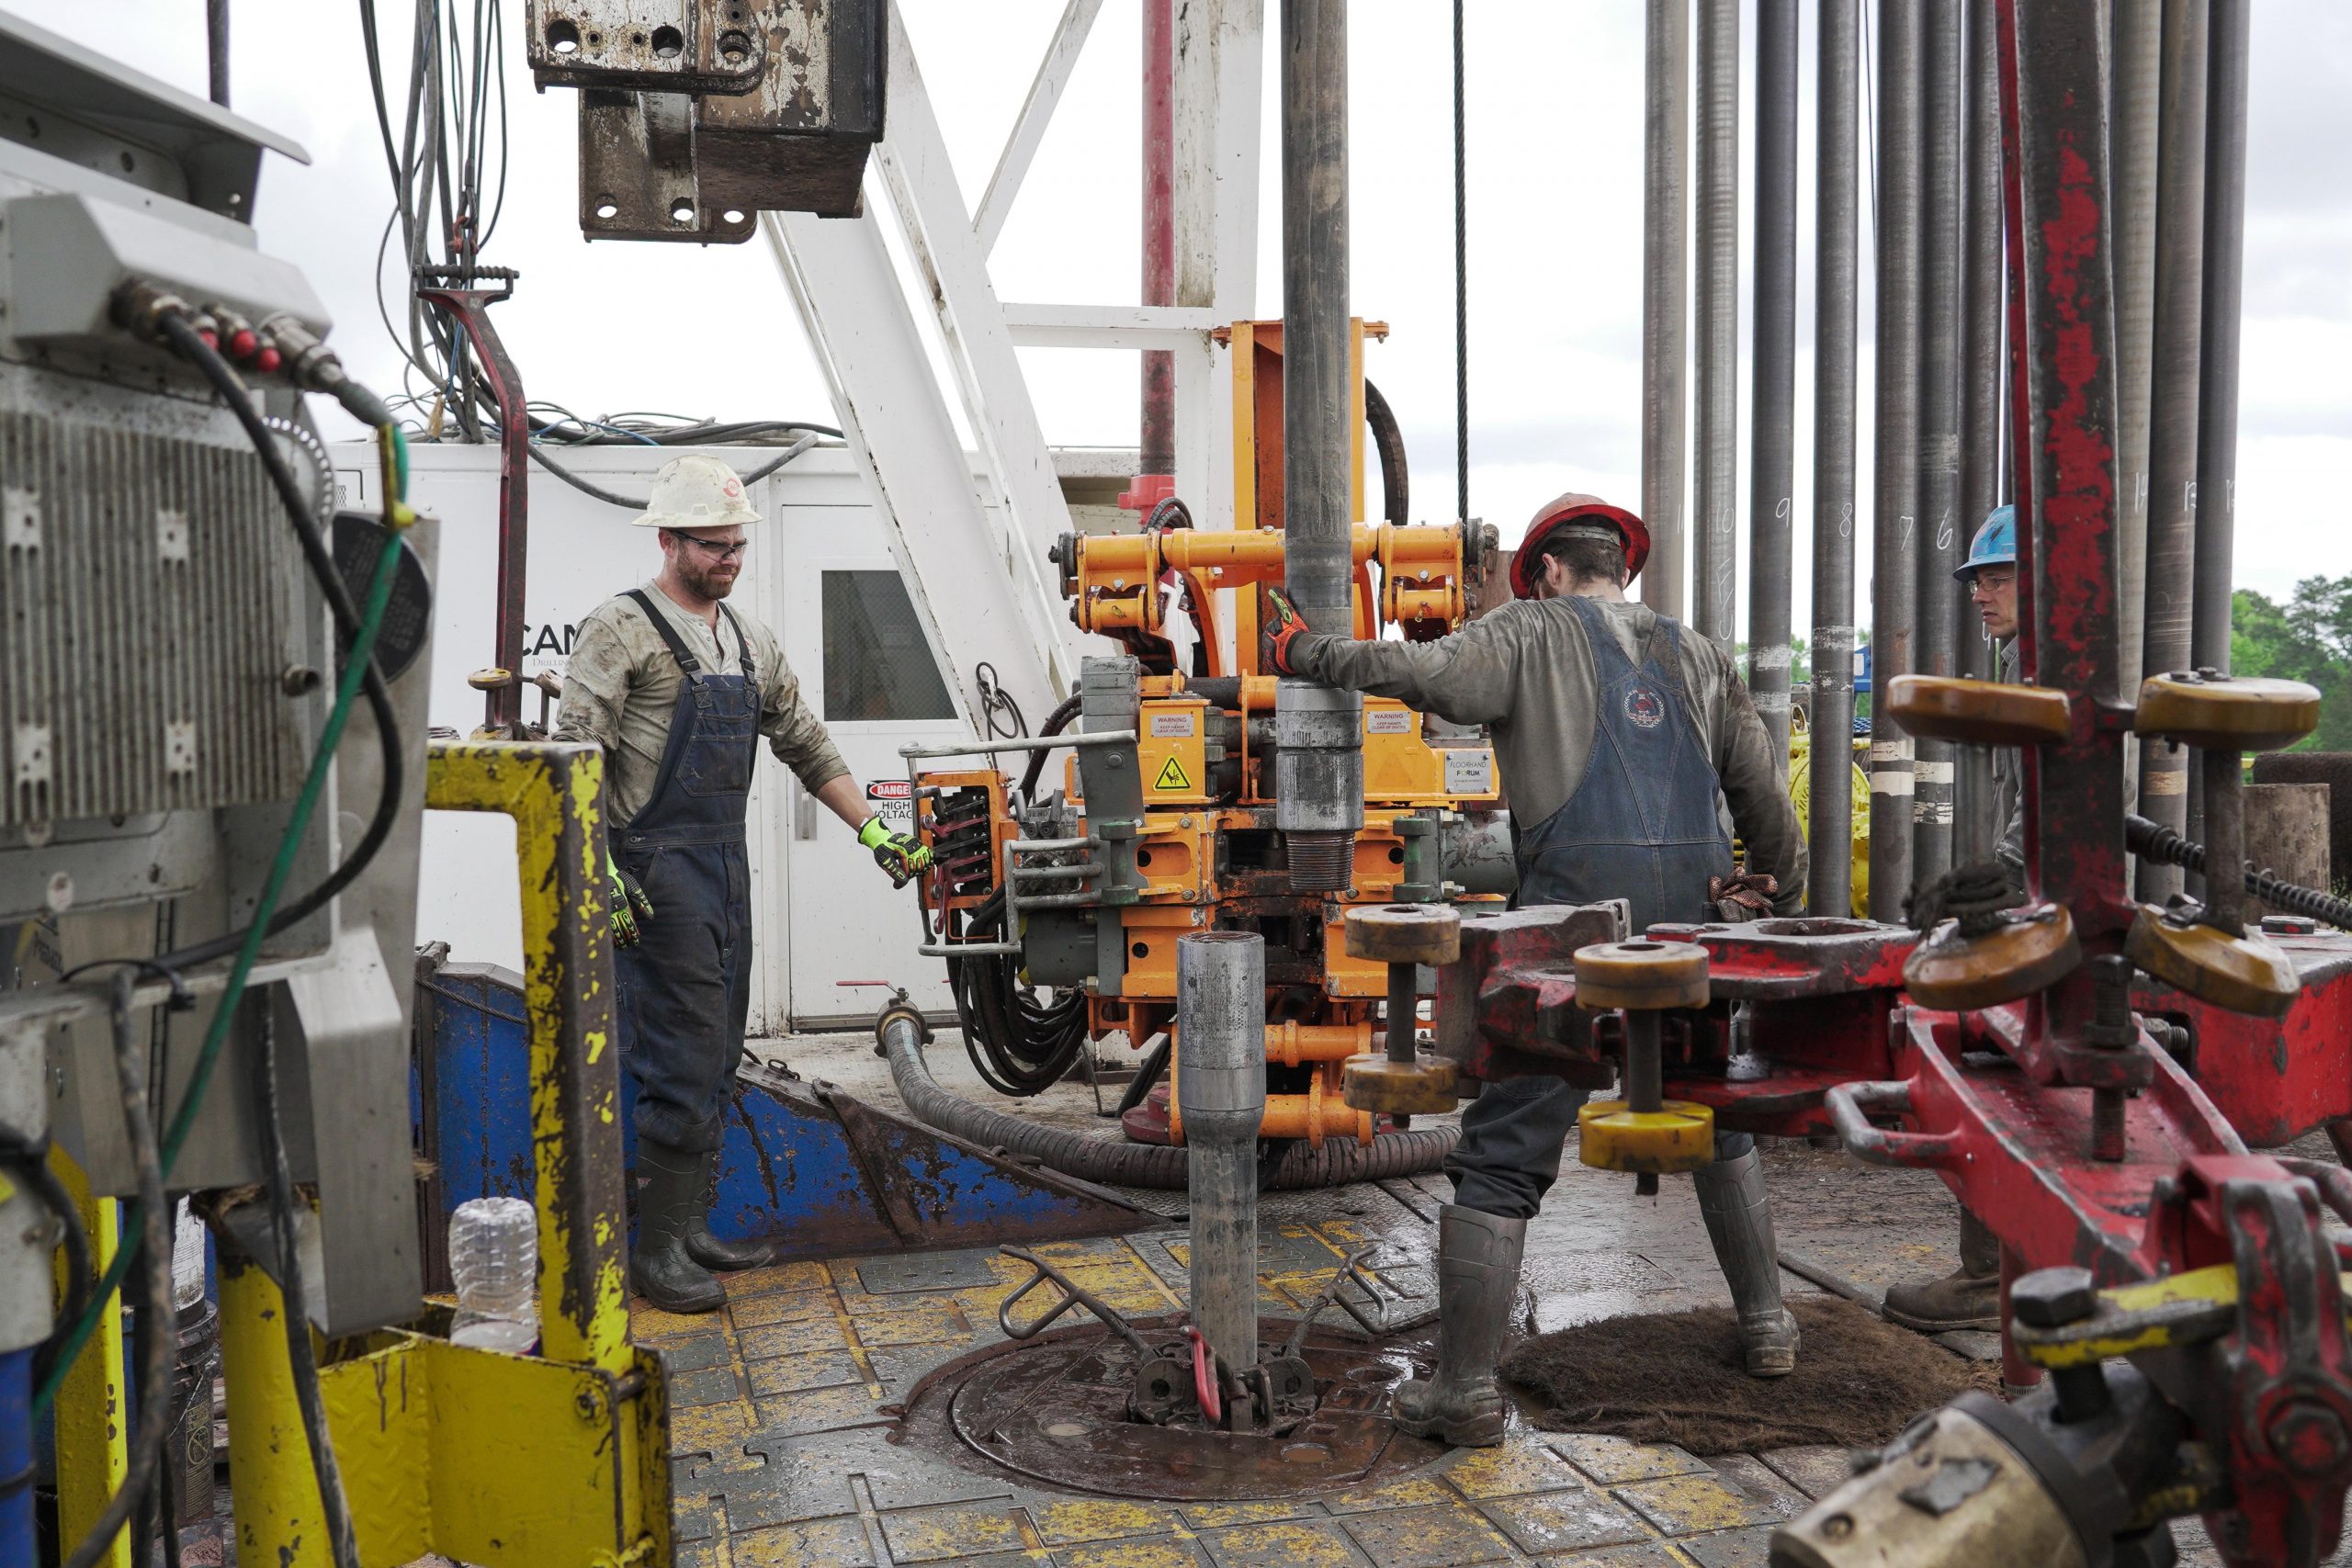 Workers on an oil rig at the drilling controls preparing to drill with an Ulterra Split Blade bit